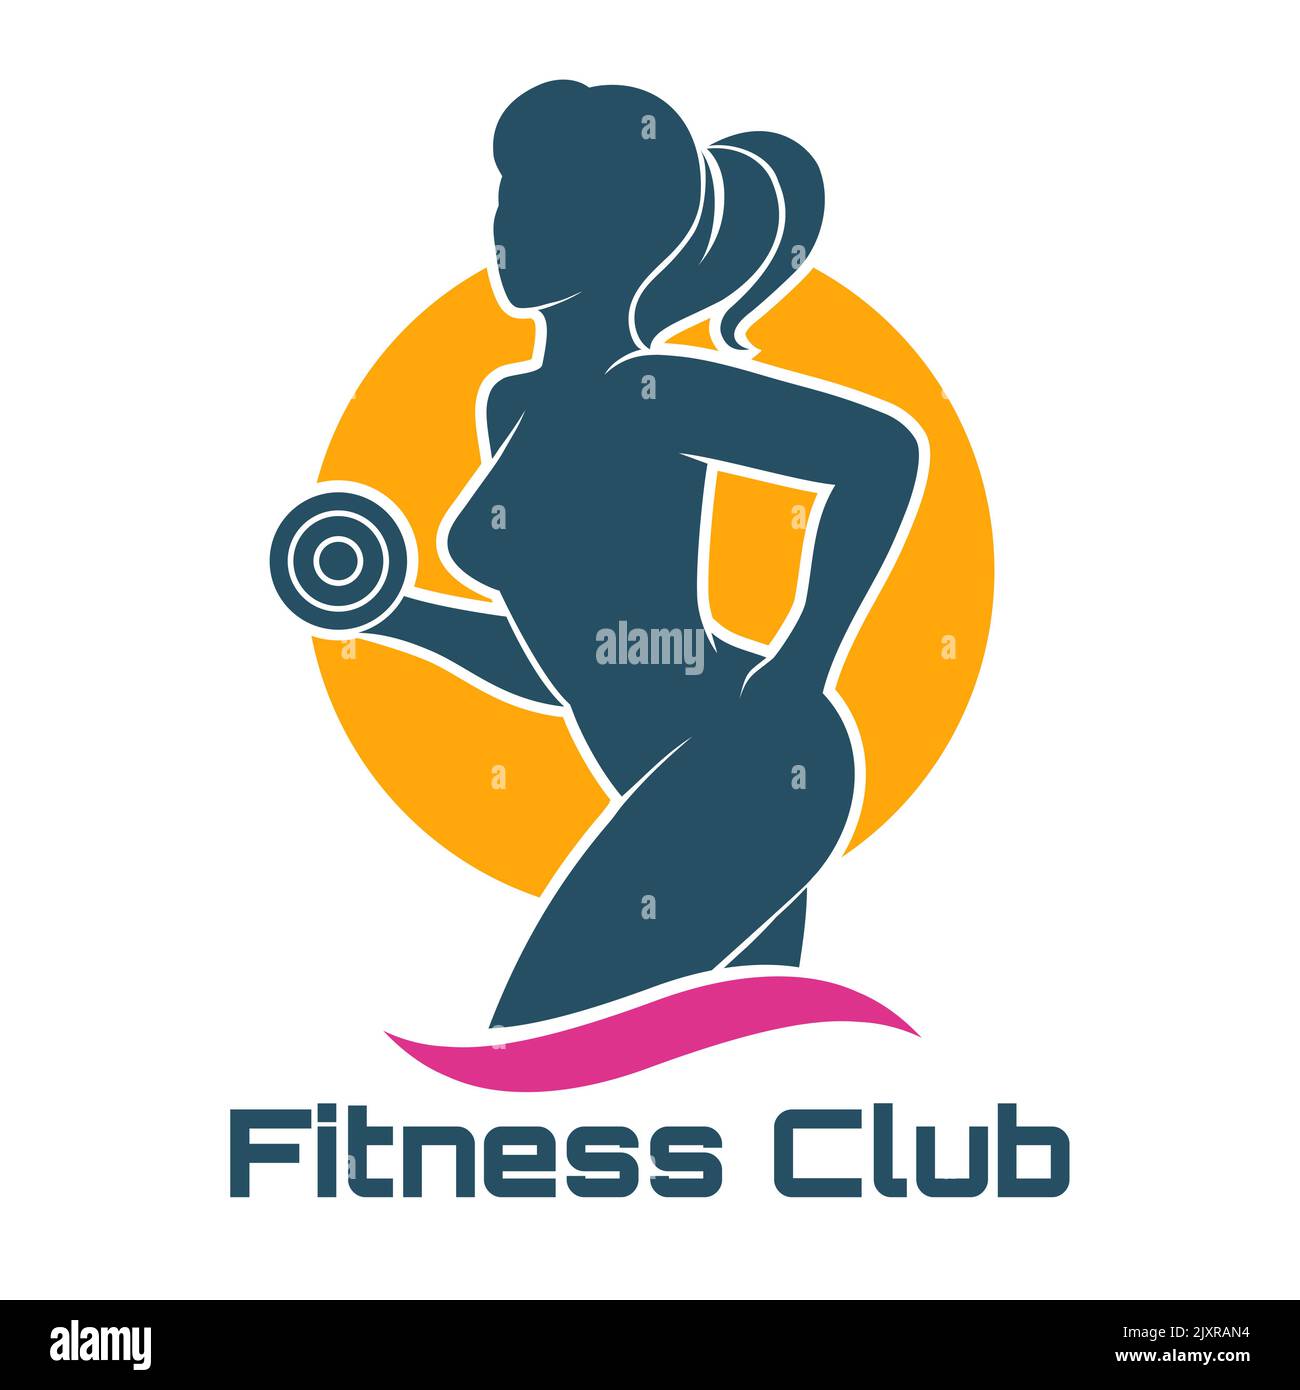 Fitness club logo or emblem. Woman holds dumbbell. Isolated on white background. Stock Vector